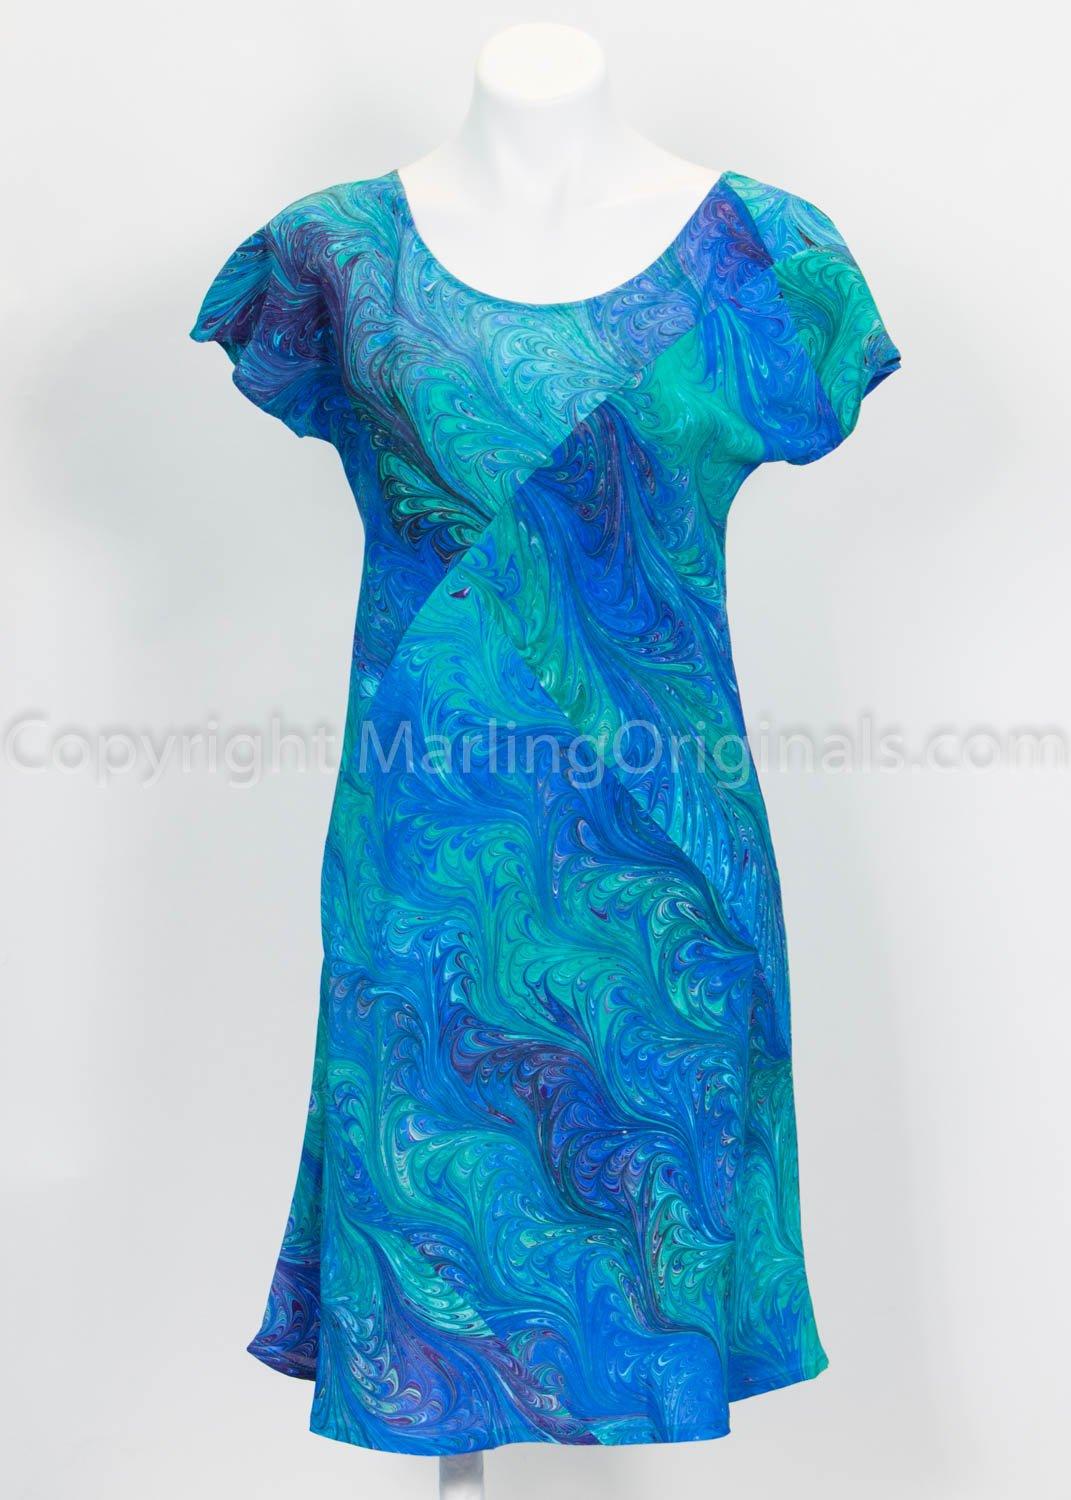 marbled silk bias cut dress in rich blues, teal and greens